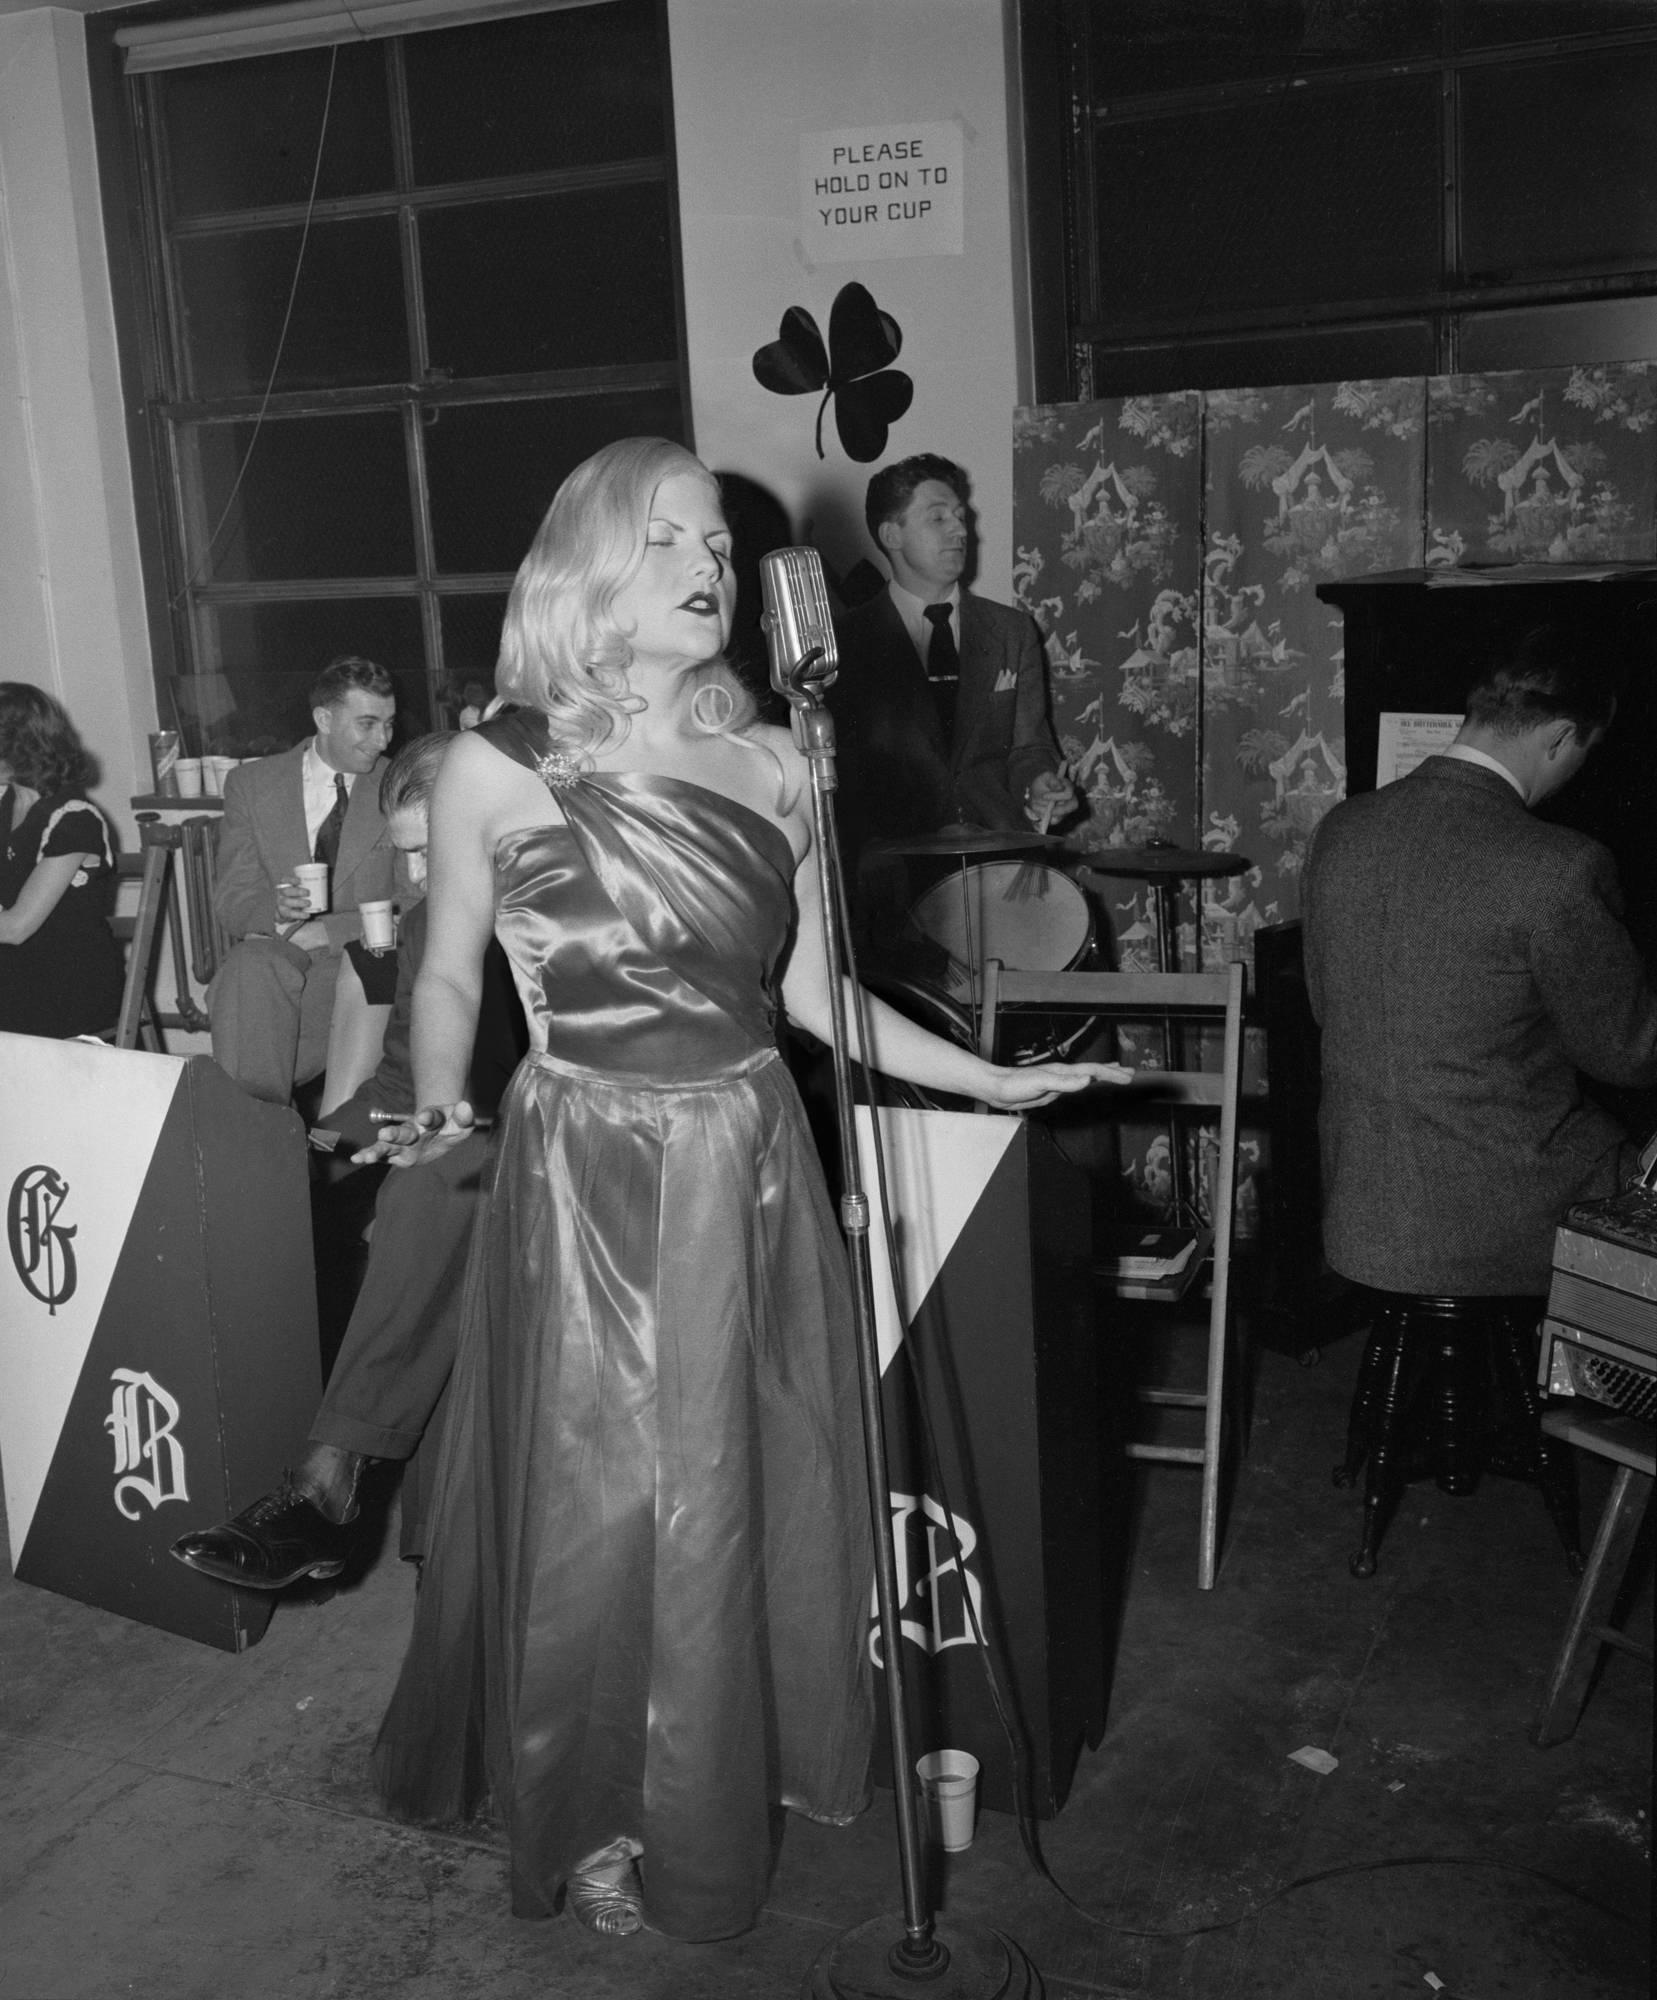 Jennifer Greenburg Black and White Photograph - Two years later, I was drunk enough to sing at the St. Pat's party. 2014